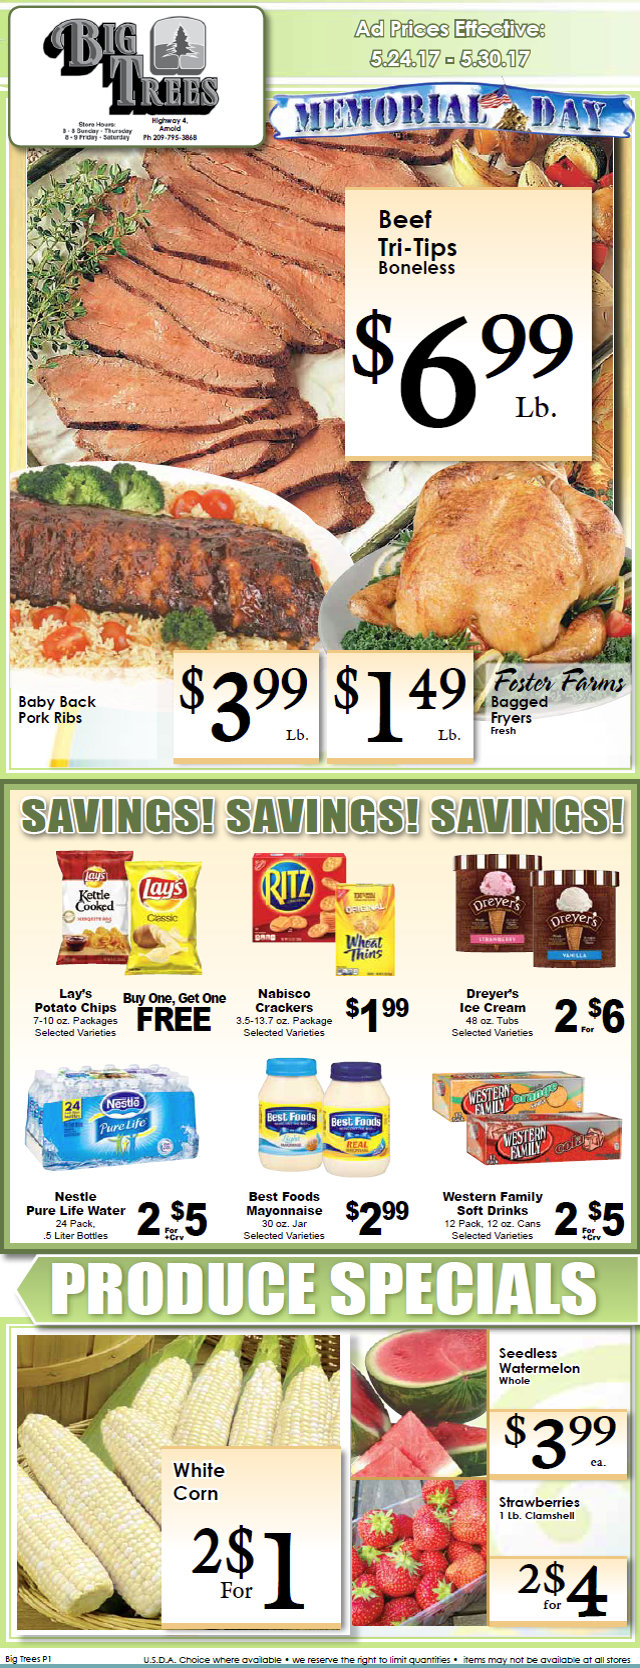 Big Trees Market Weekly Ad & Grocery Specials Through May 30th